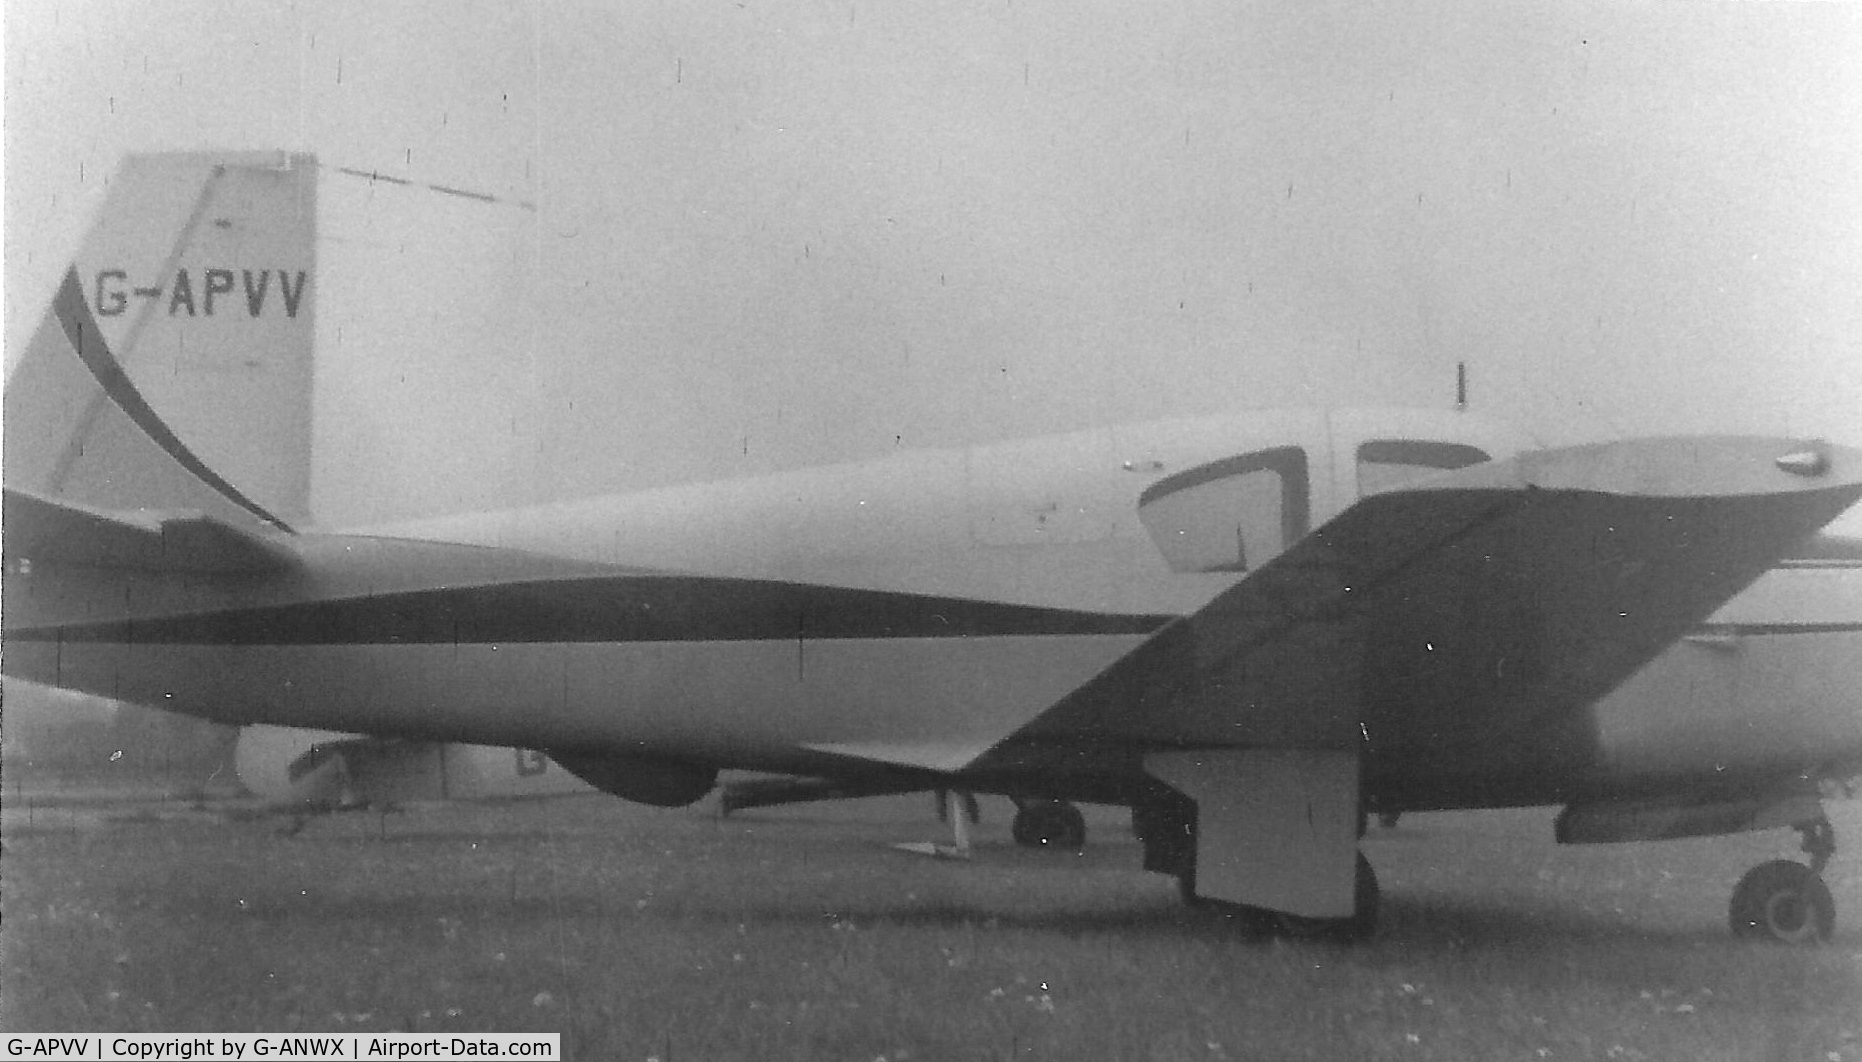 G-APVV, 1959 Mooney M20A C/N 1474, Photo taken at Kidlington 1959 with a box Brownie camera. This was the 1st Mooney on the U.K. register.